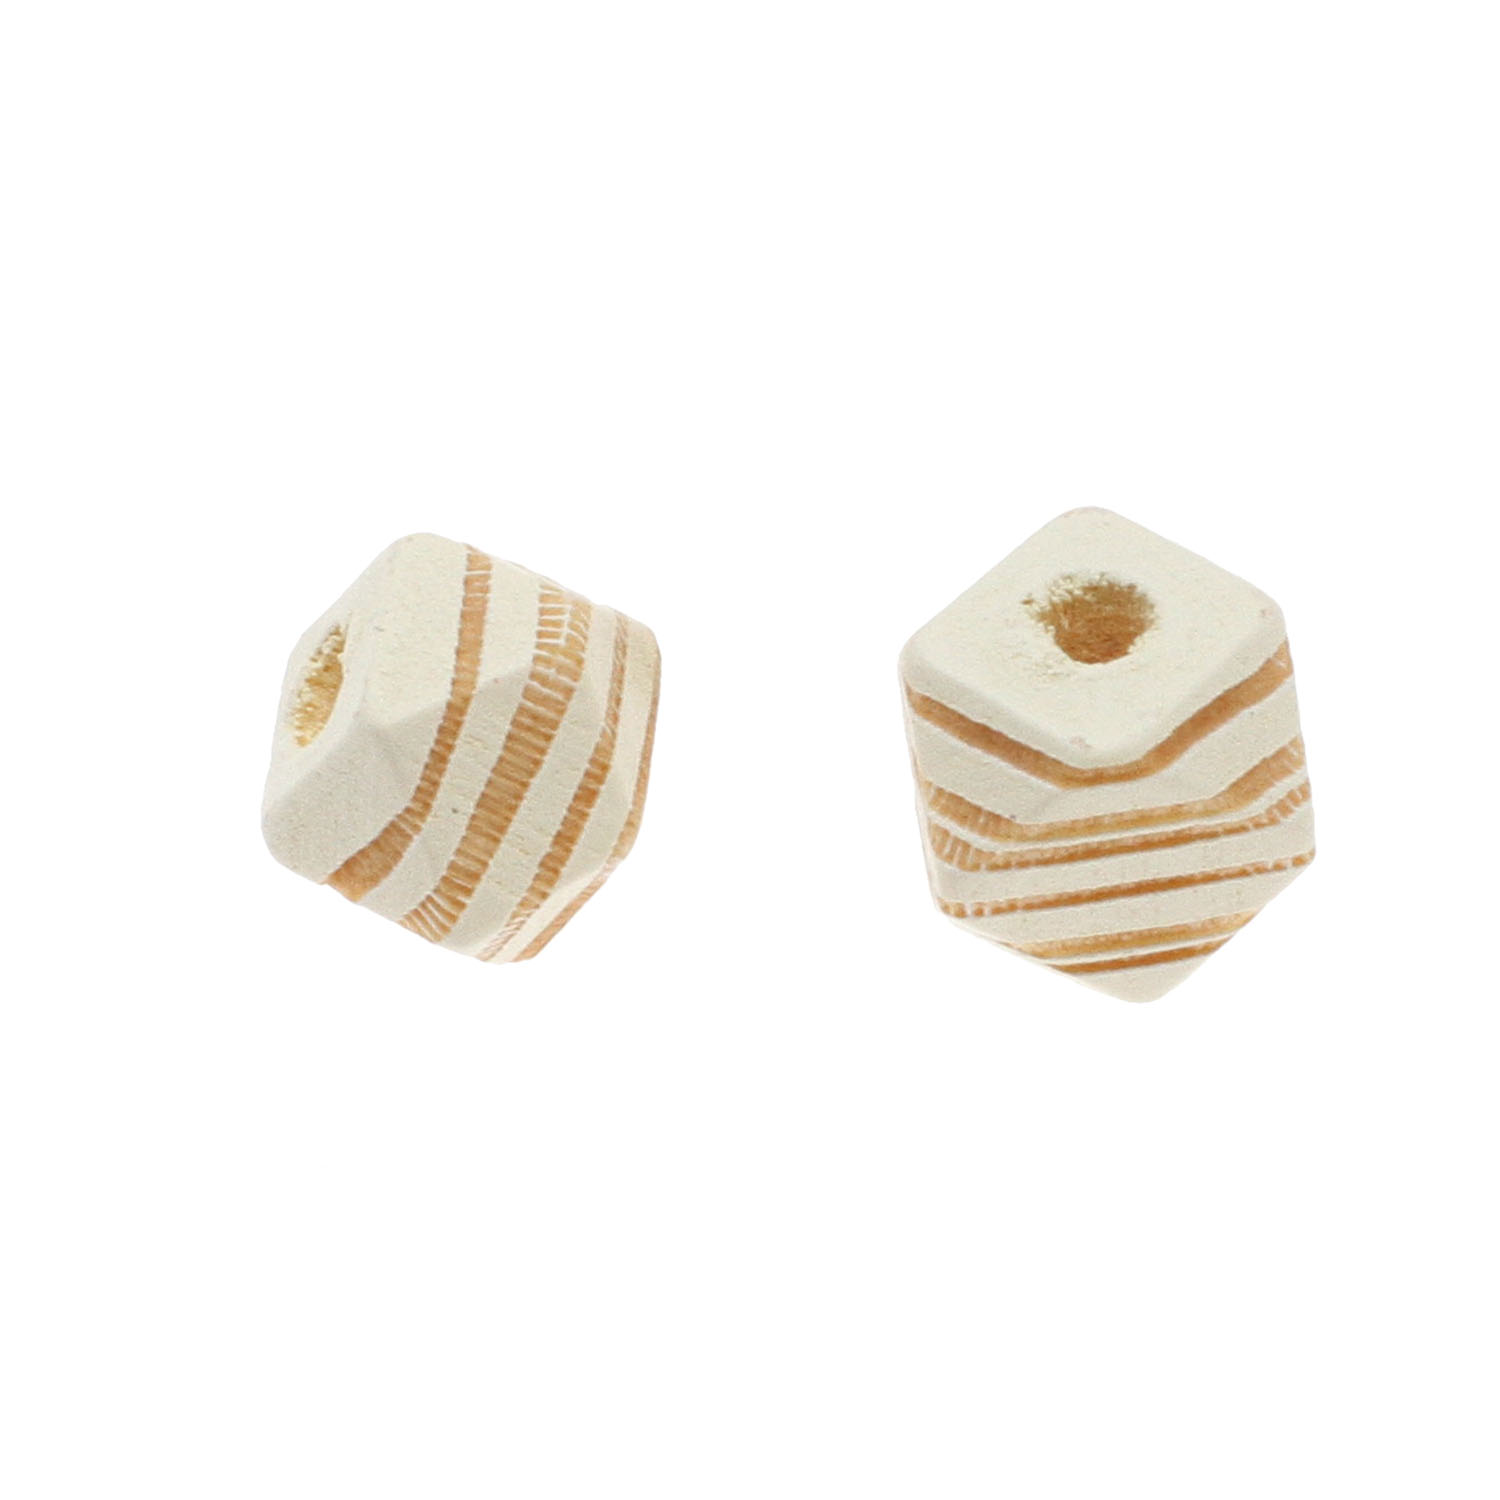 12:white, 12x12mm, Hole: 3mm